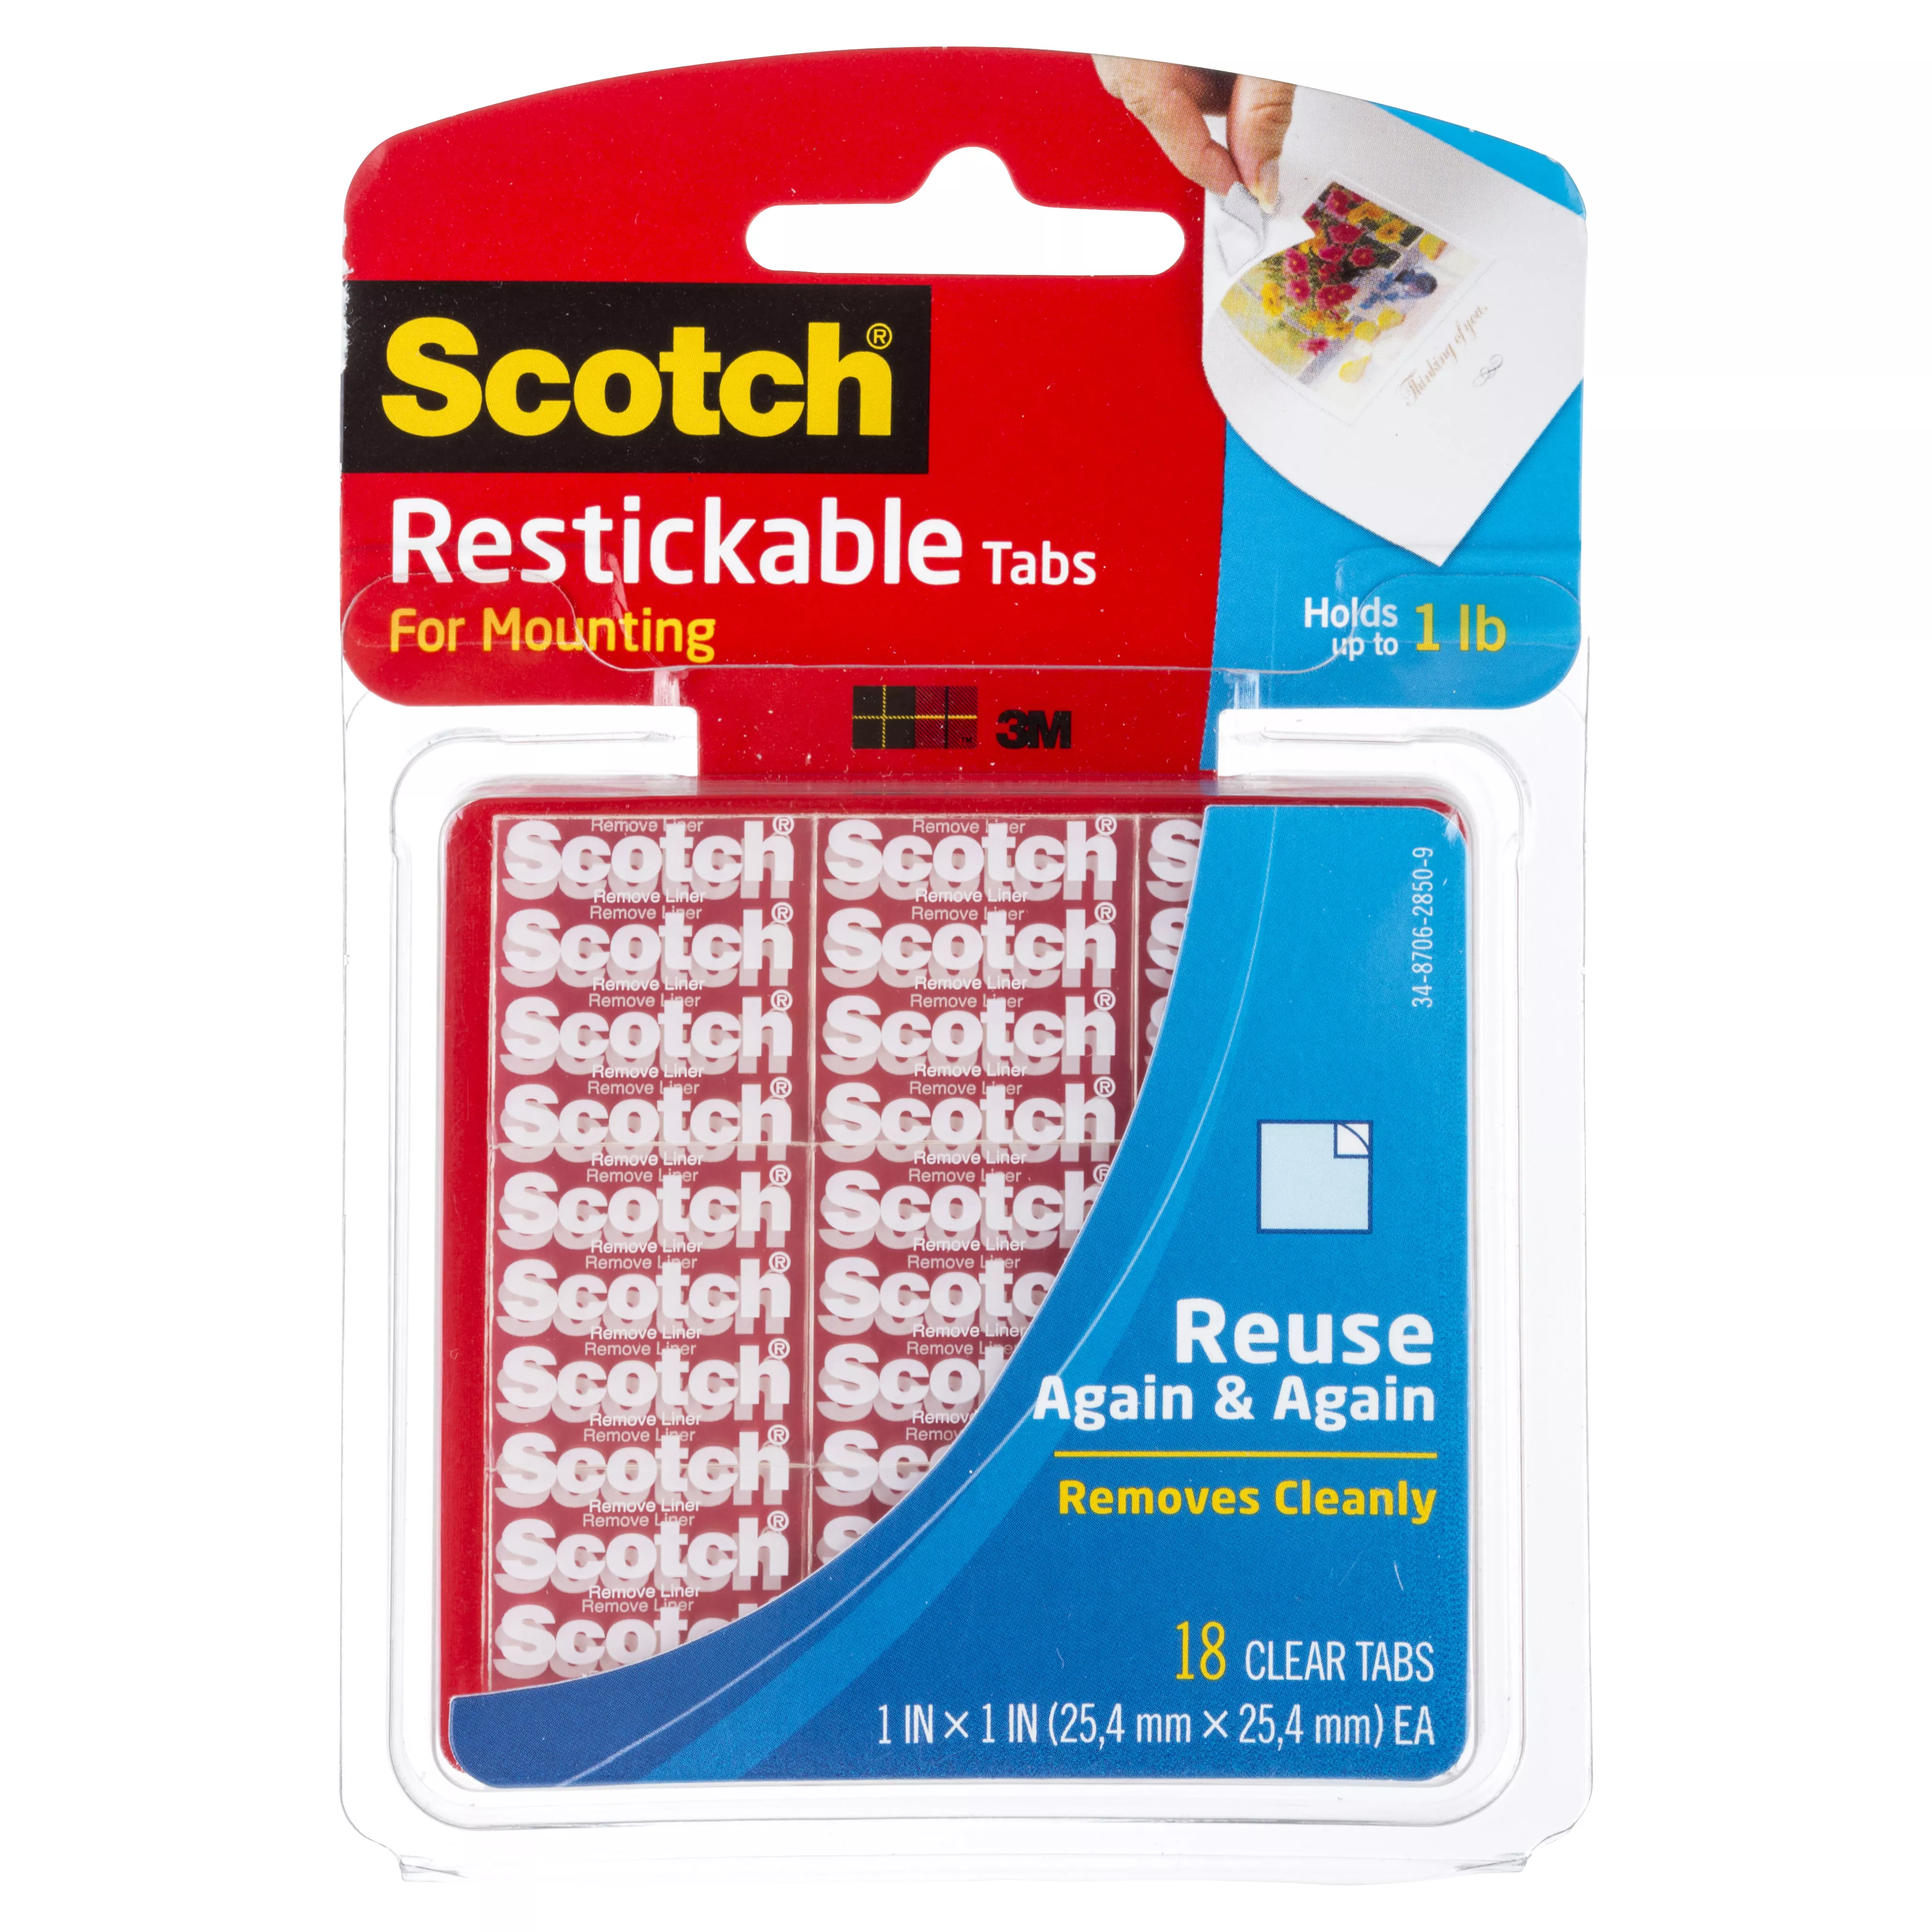 Scotch® Restickable Tabs R100, 1 in x 1 in, 18 squares